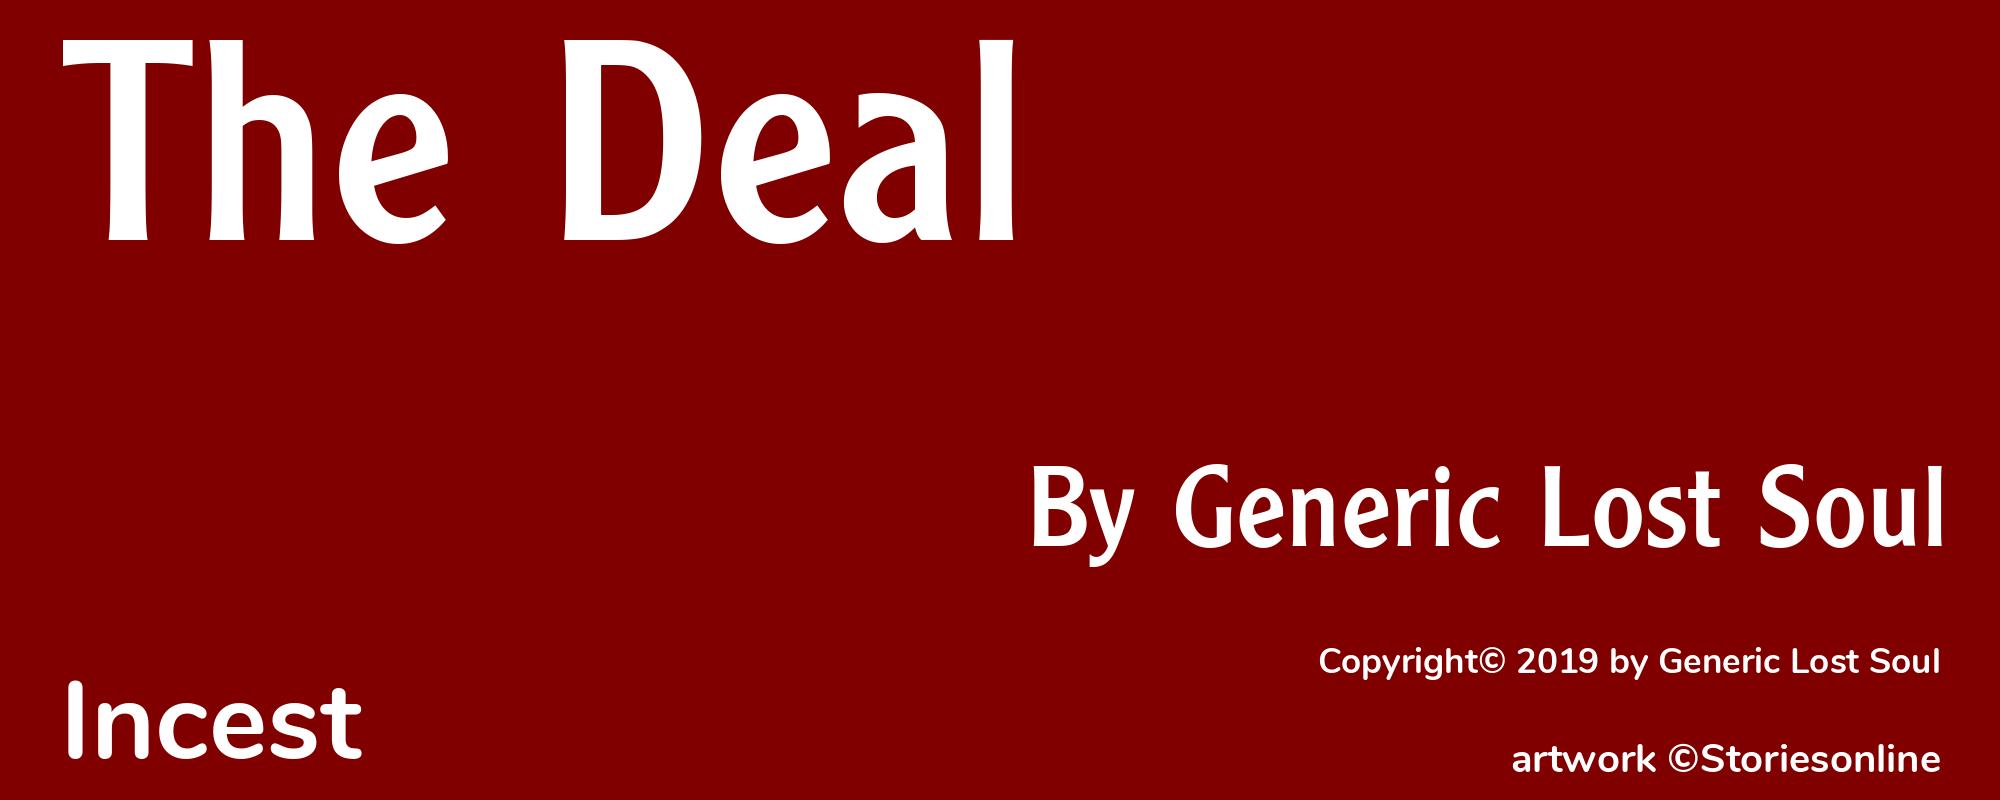 The Deal - Cover